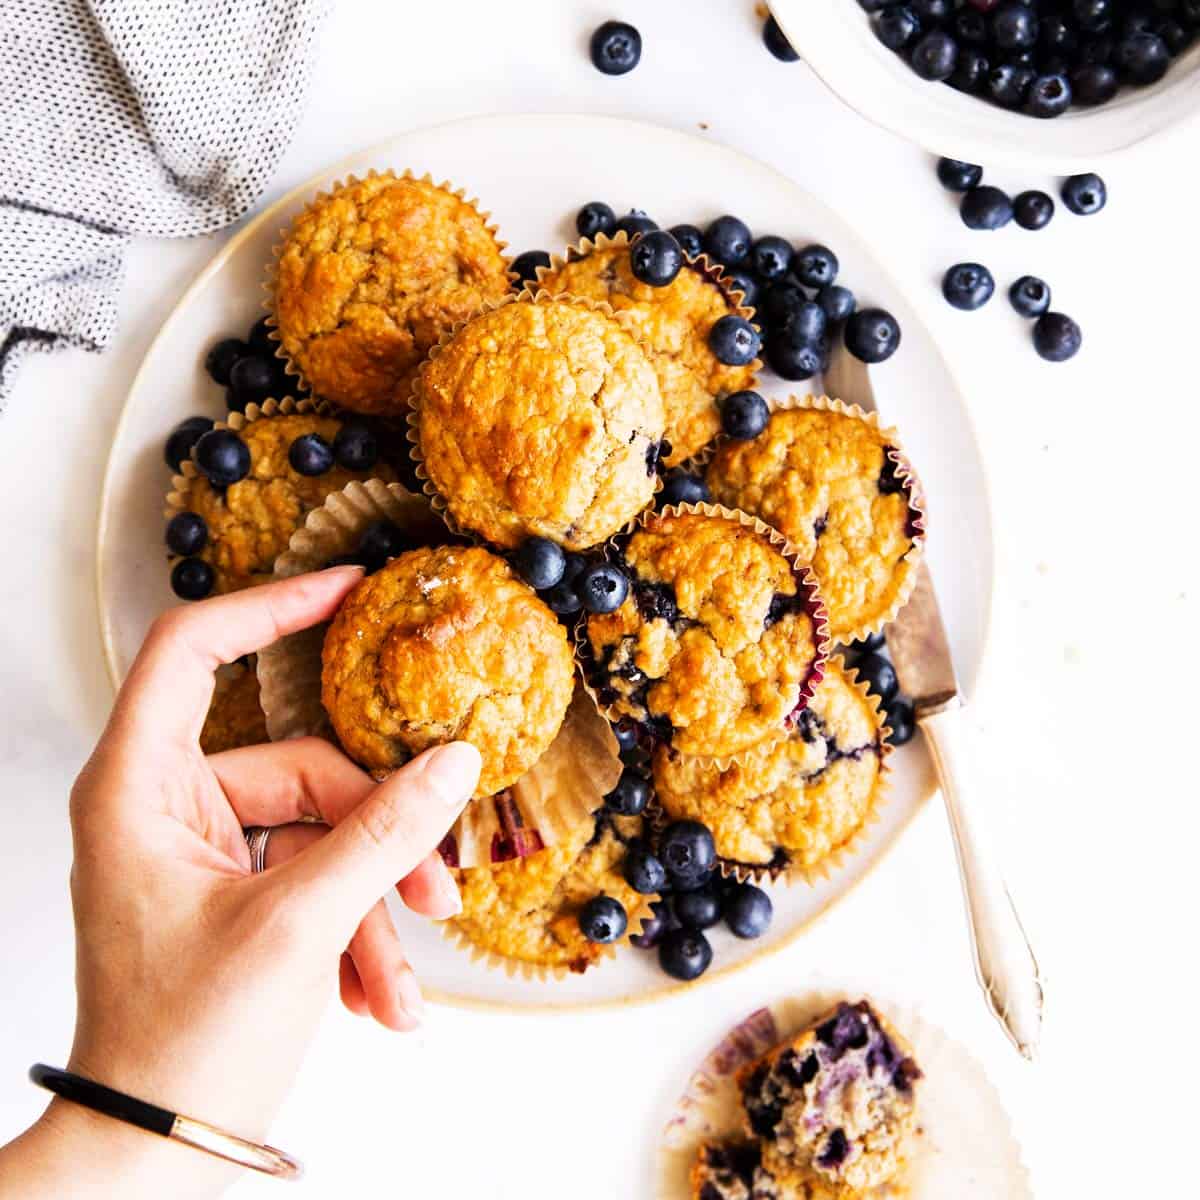 https://www.savorynothings.com/wp-content/uploads/2019/01/blueberry-oatmeal-muffins-image-sq.jpg